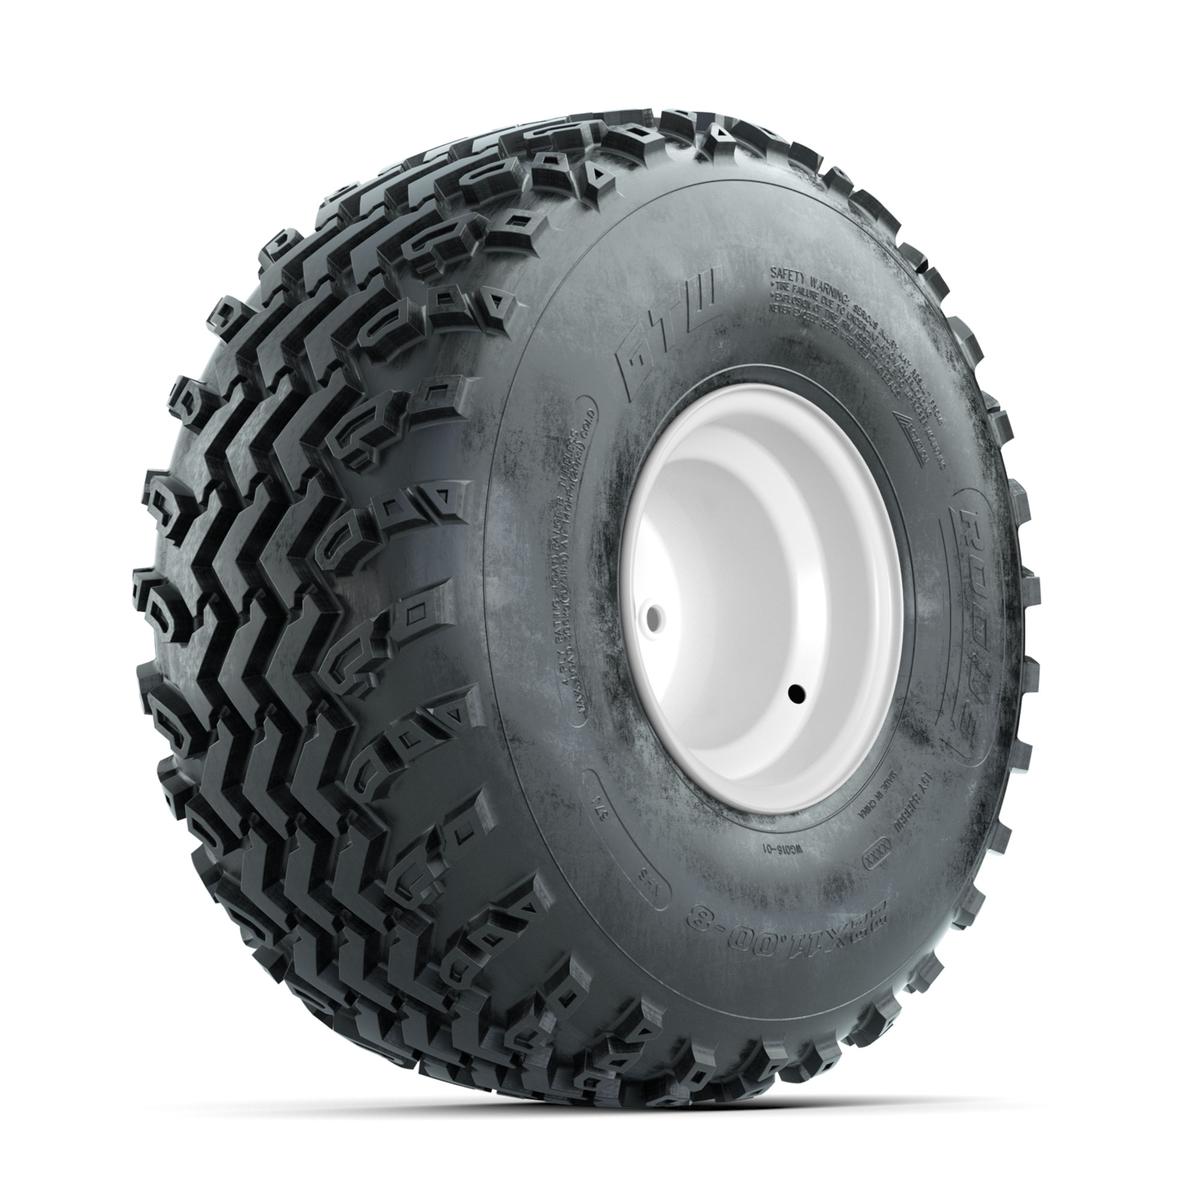 GTW Steel White 2:5 Offset 8 in Wheels with 22x11.00-8 Rogue All Terrain Tires – Full Set